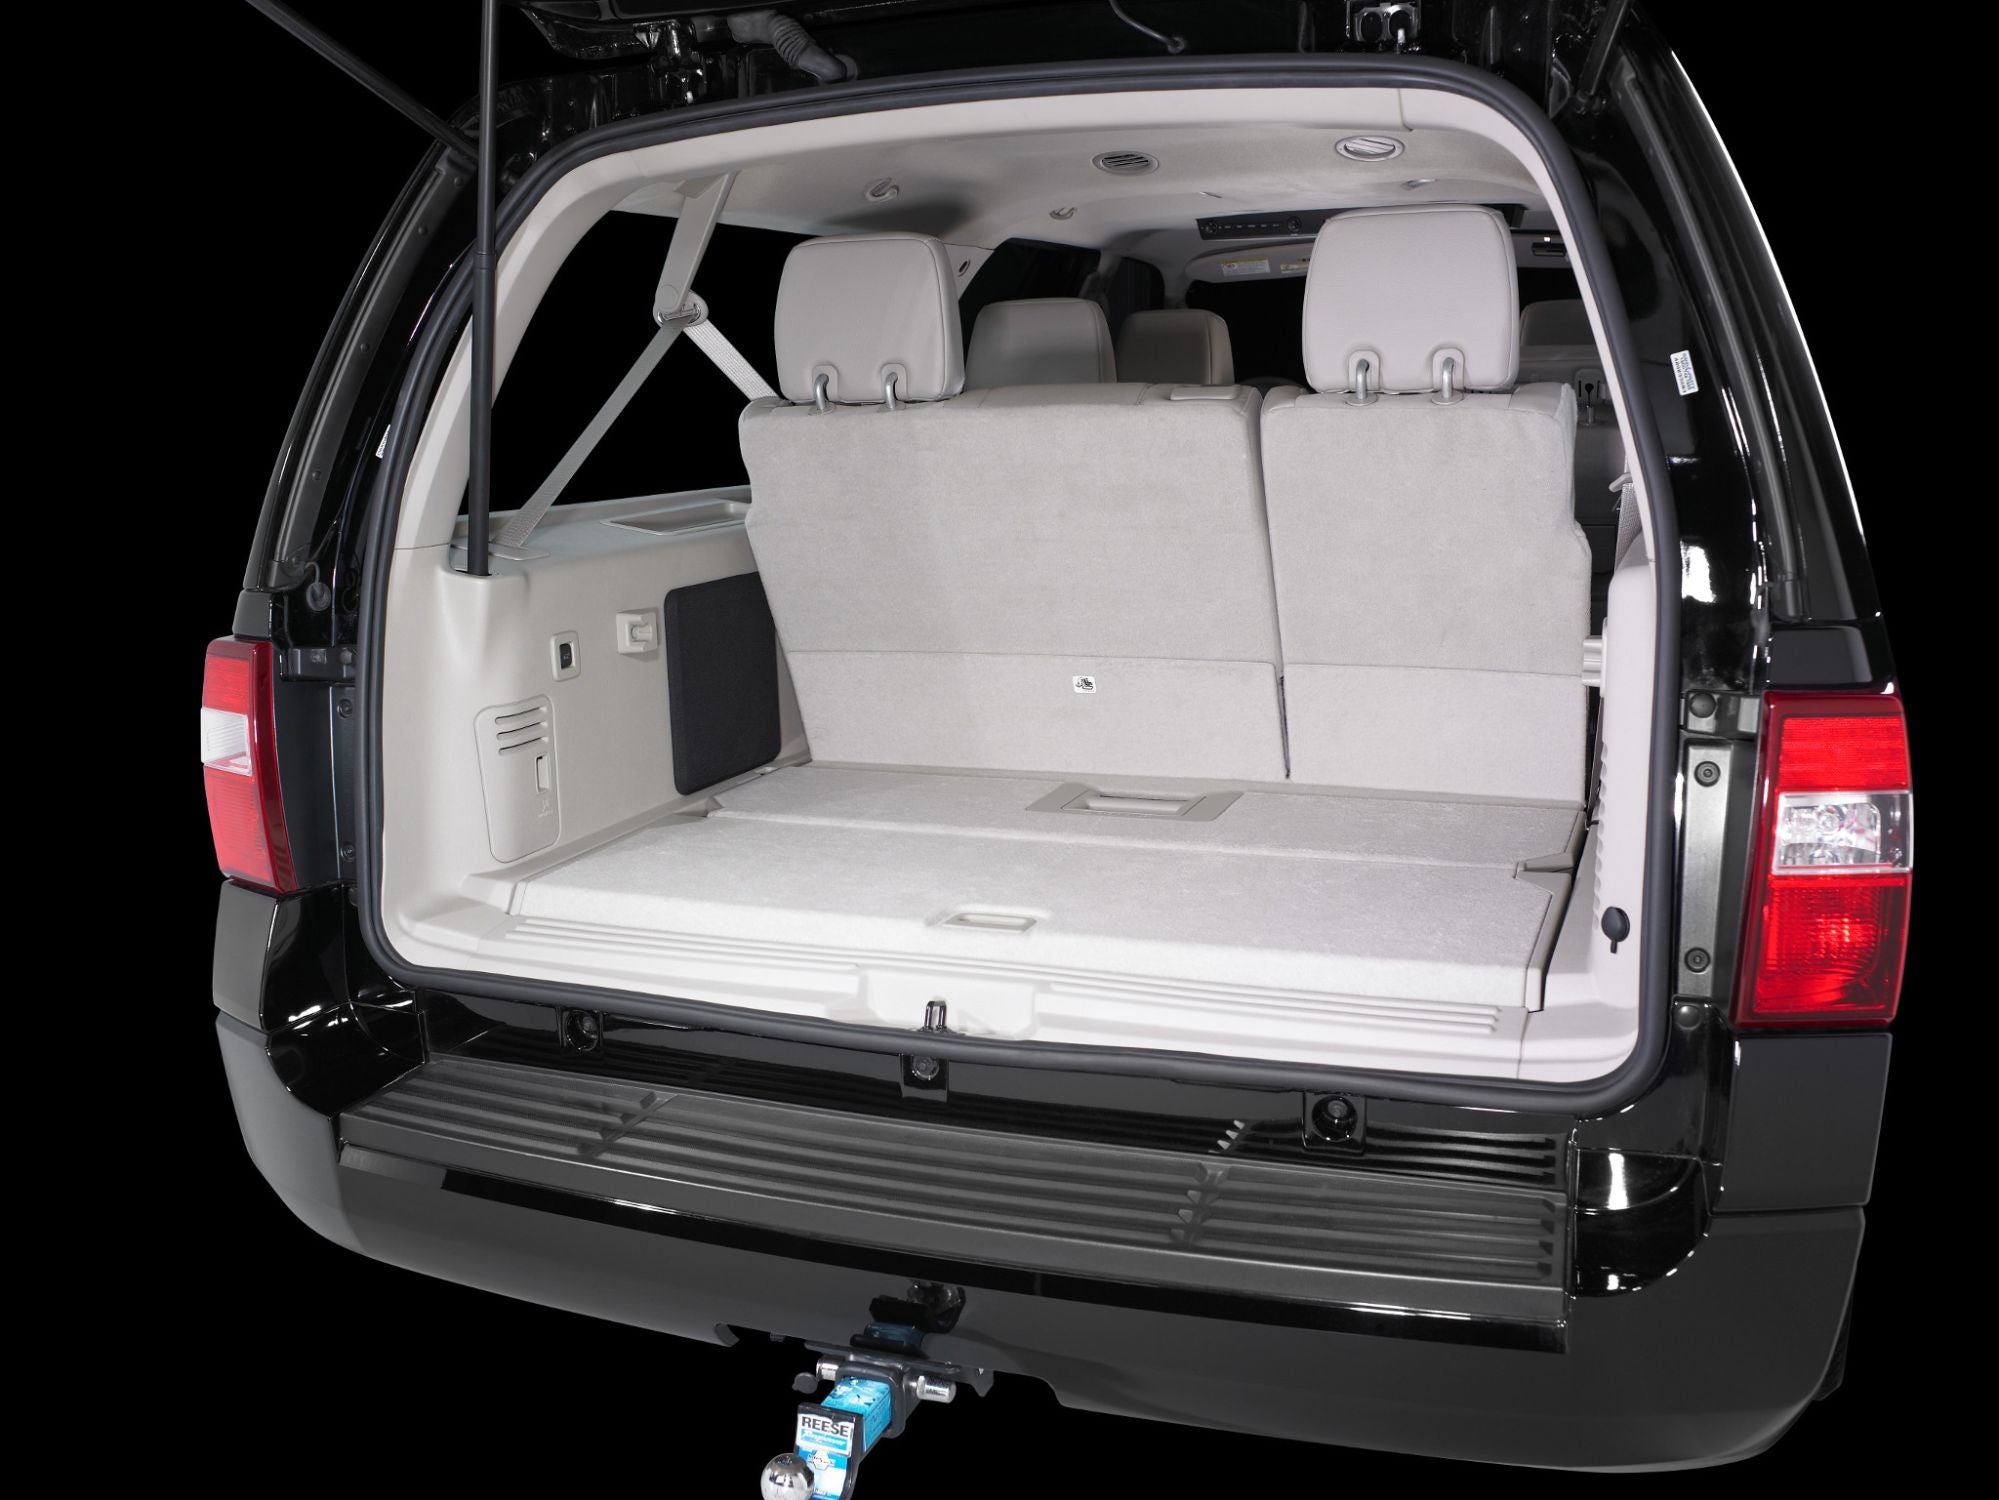 SB-F-EXPDEL-10W3v3 Stealthbox Installed in Vehicle